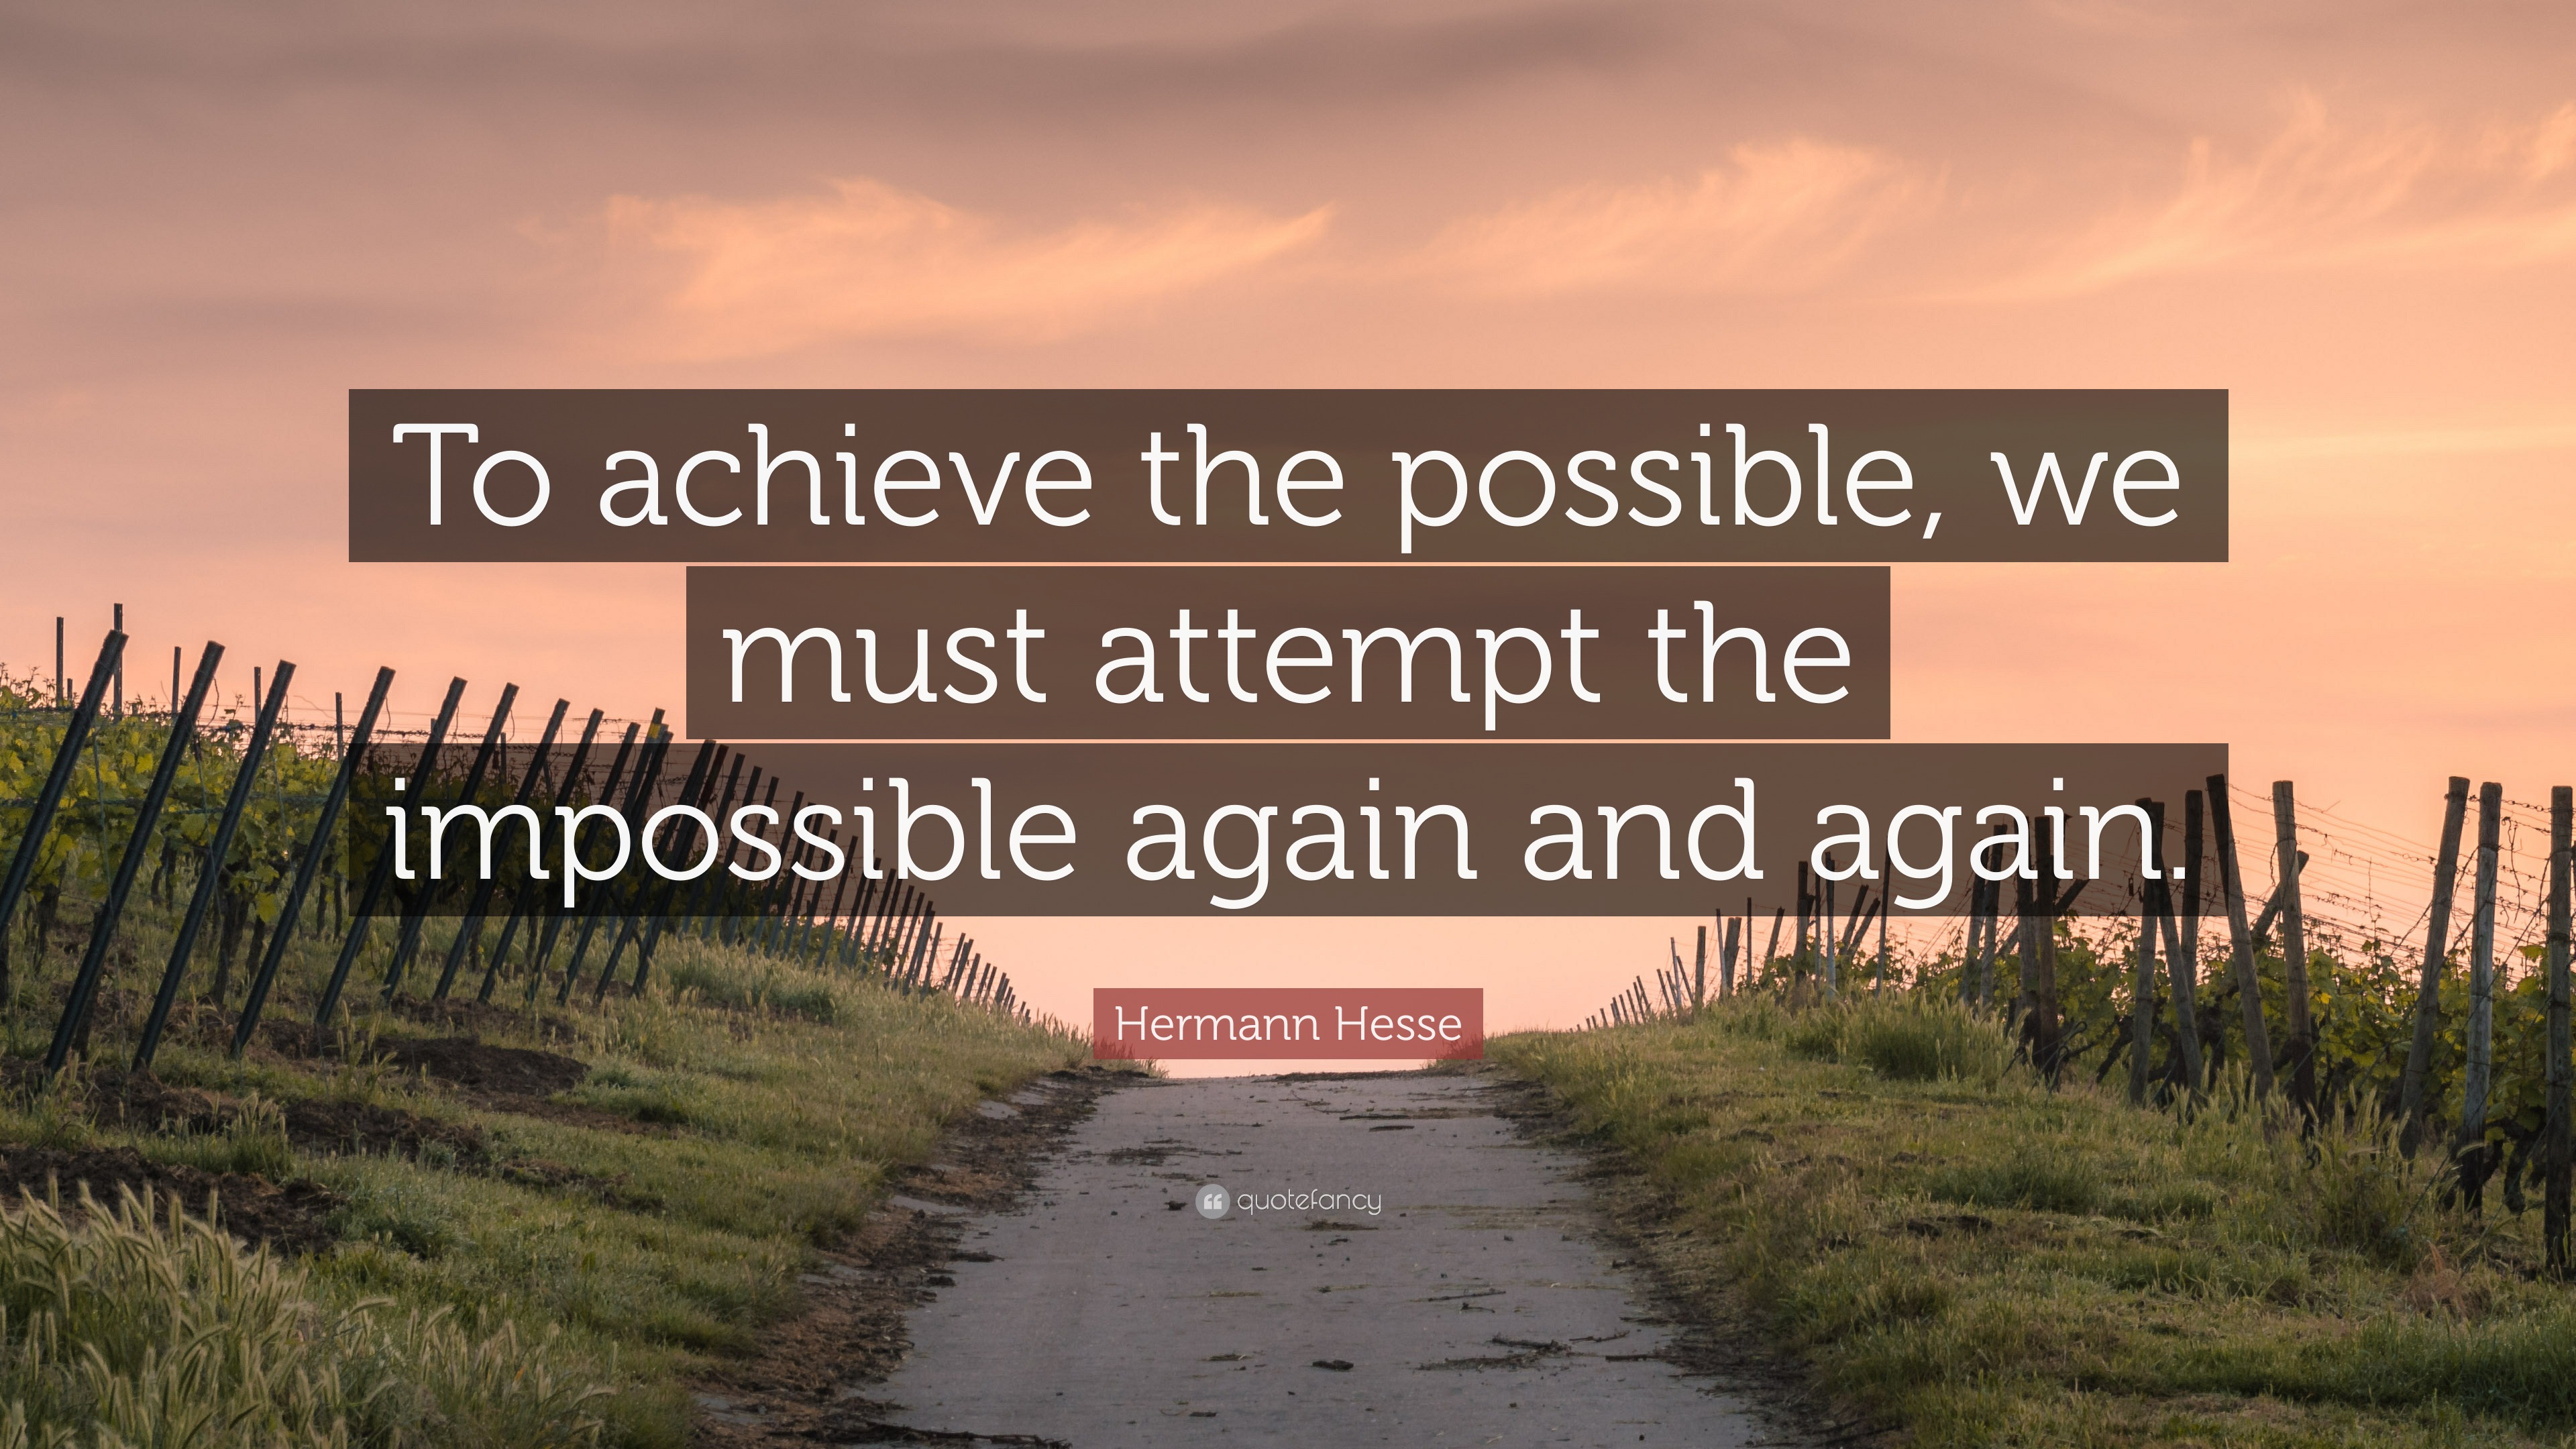 Hermann Hesse Quote: “To achieve the possible, we must attempt the ...